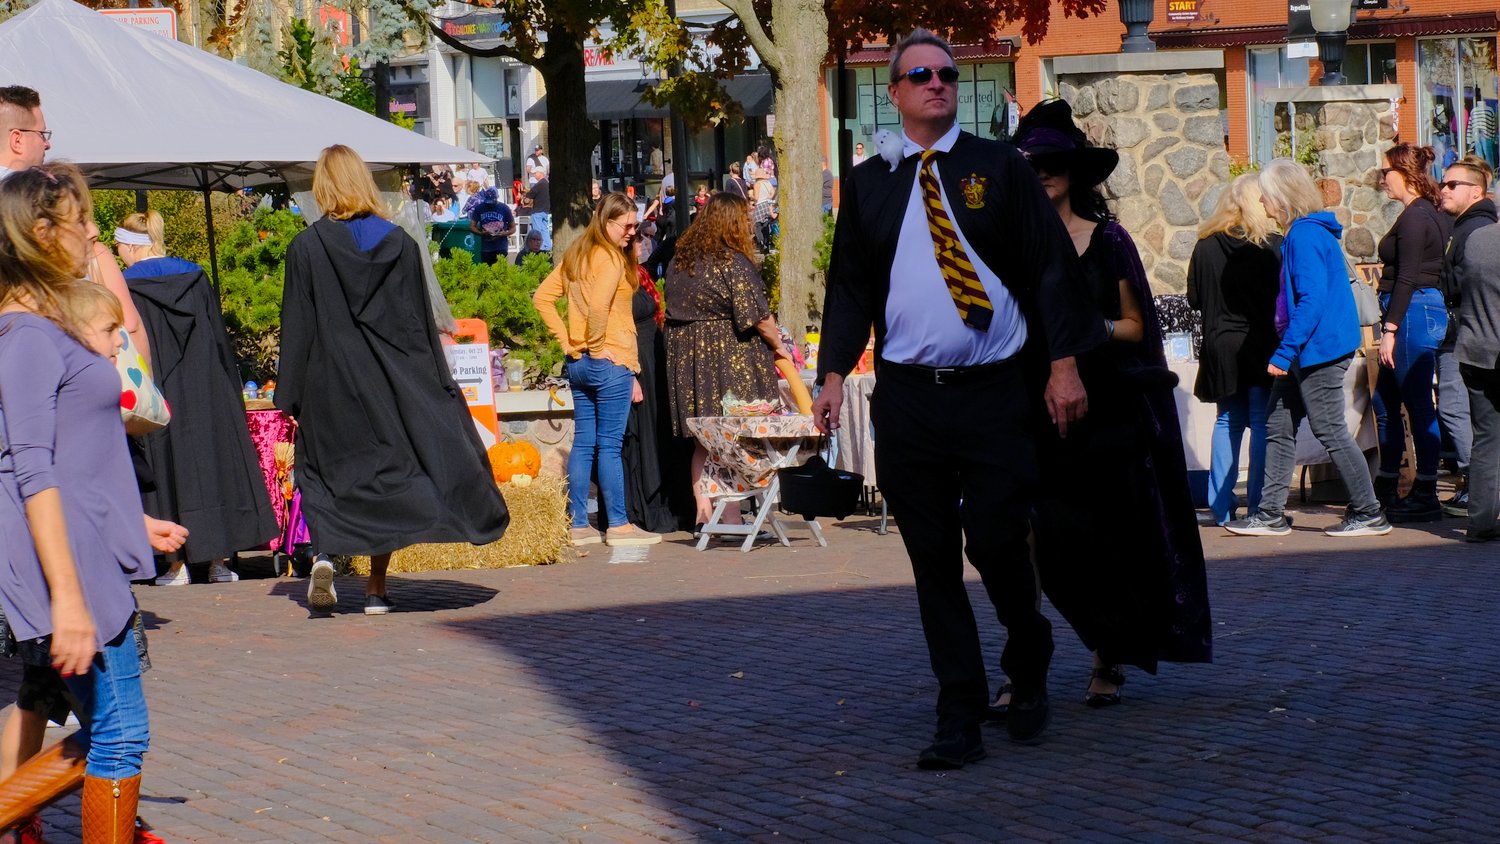 Cosplayers walking the cobblestone streets around the Historic Woodstock Square.